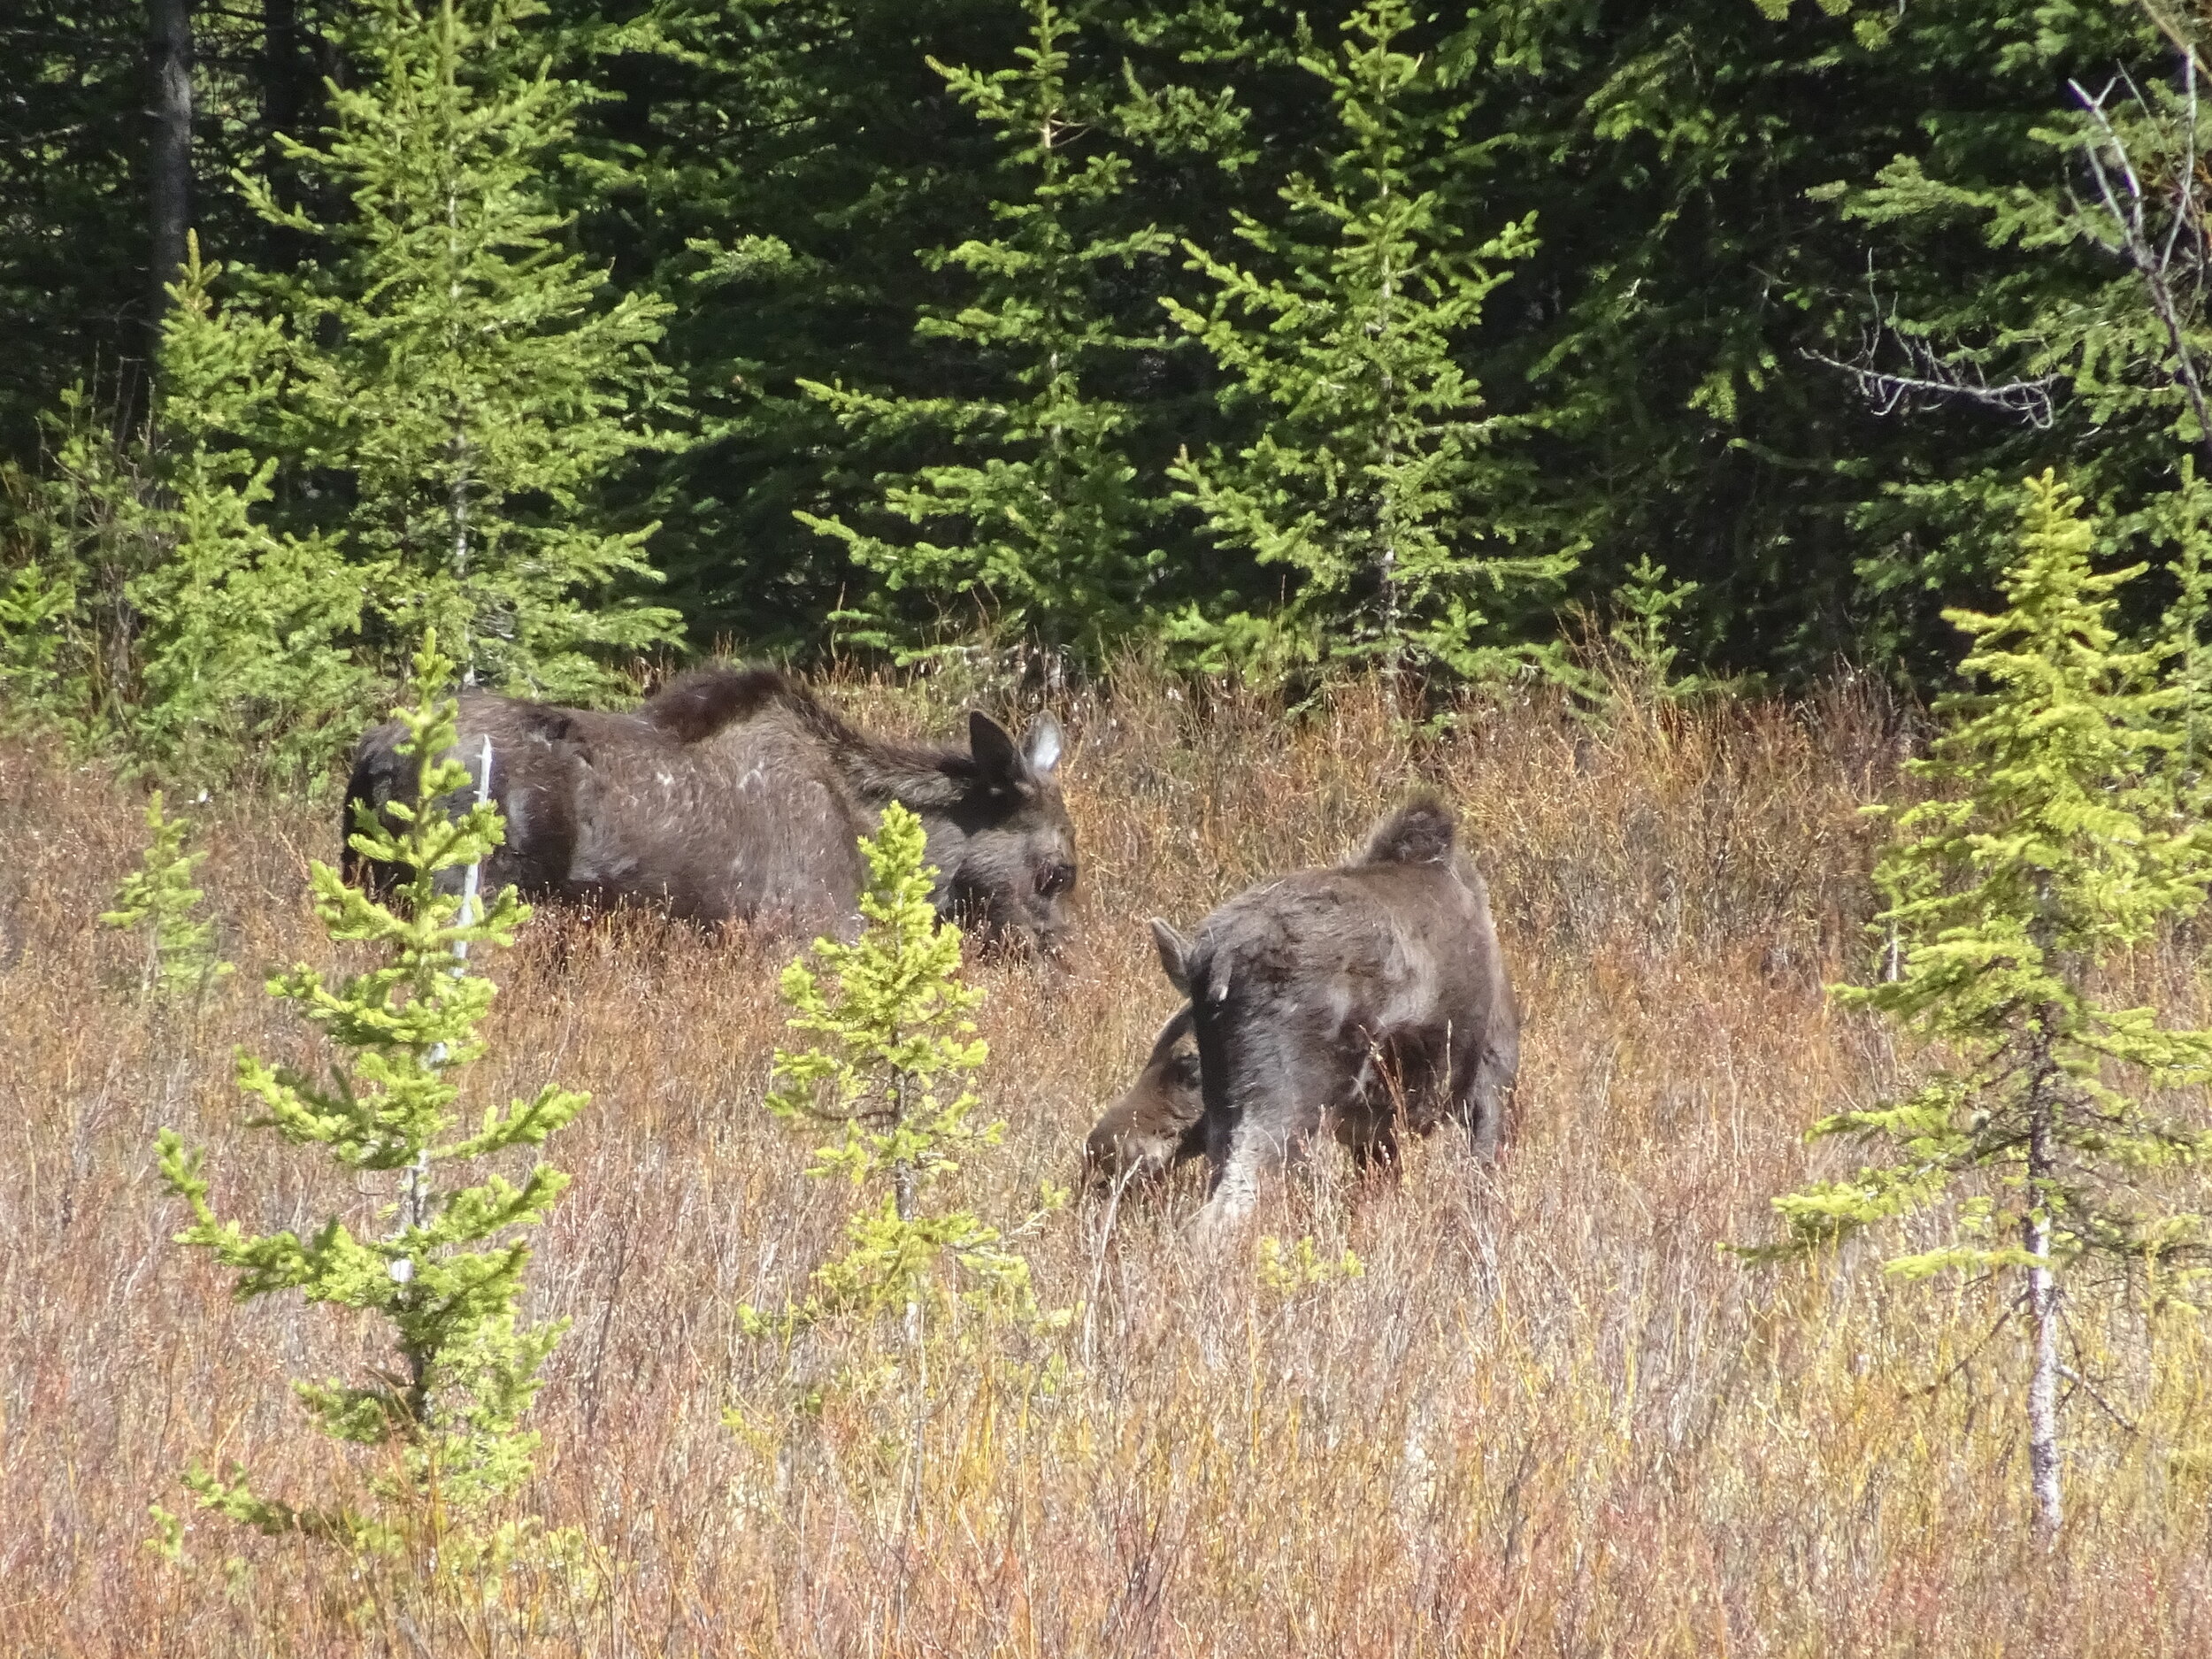 Two cow Moose in a field outside of Cooke City, Custer Gallatin National Forest, Silver Gate, WY.  Photo by Karen Boudreaux, May 29, 2021